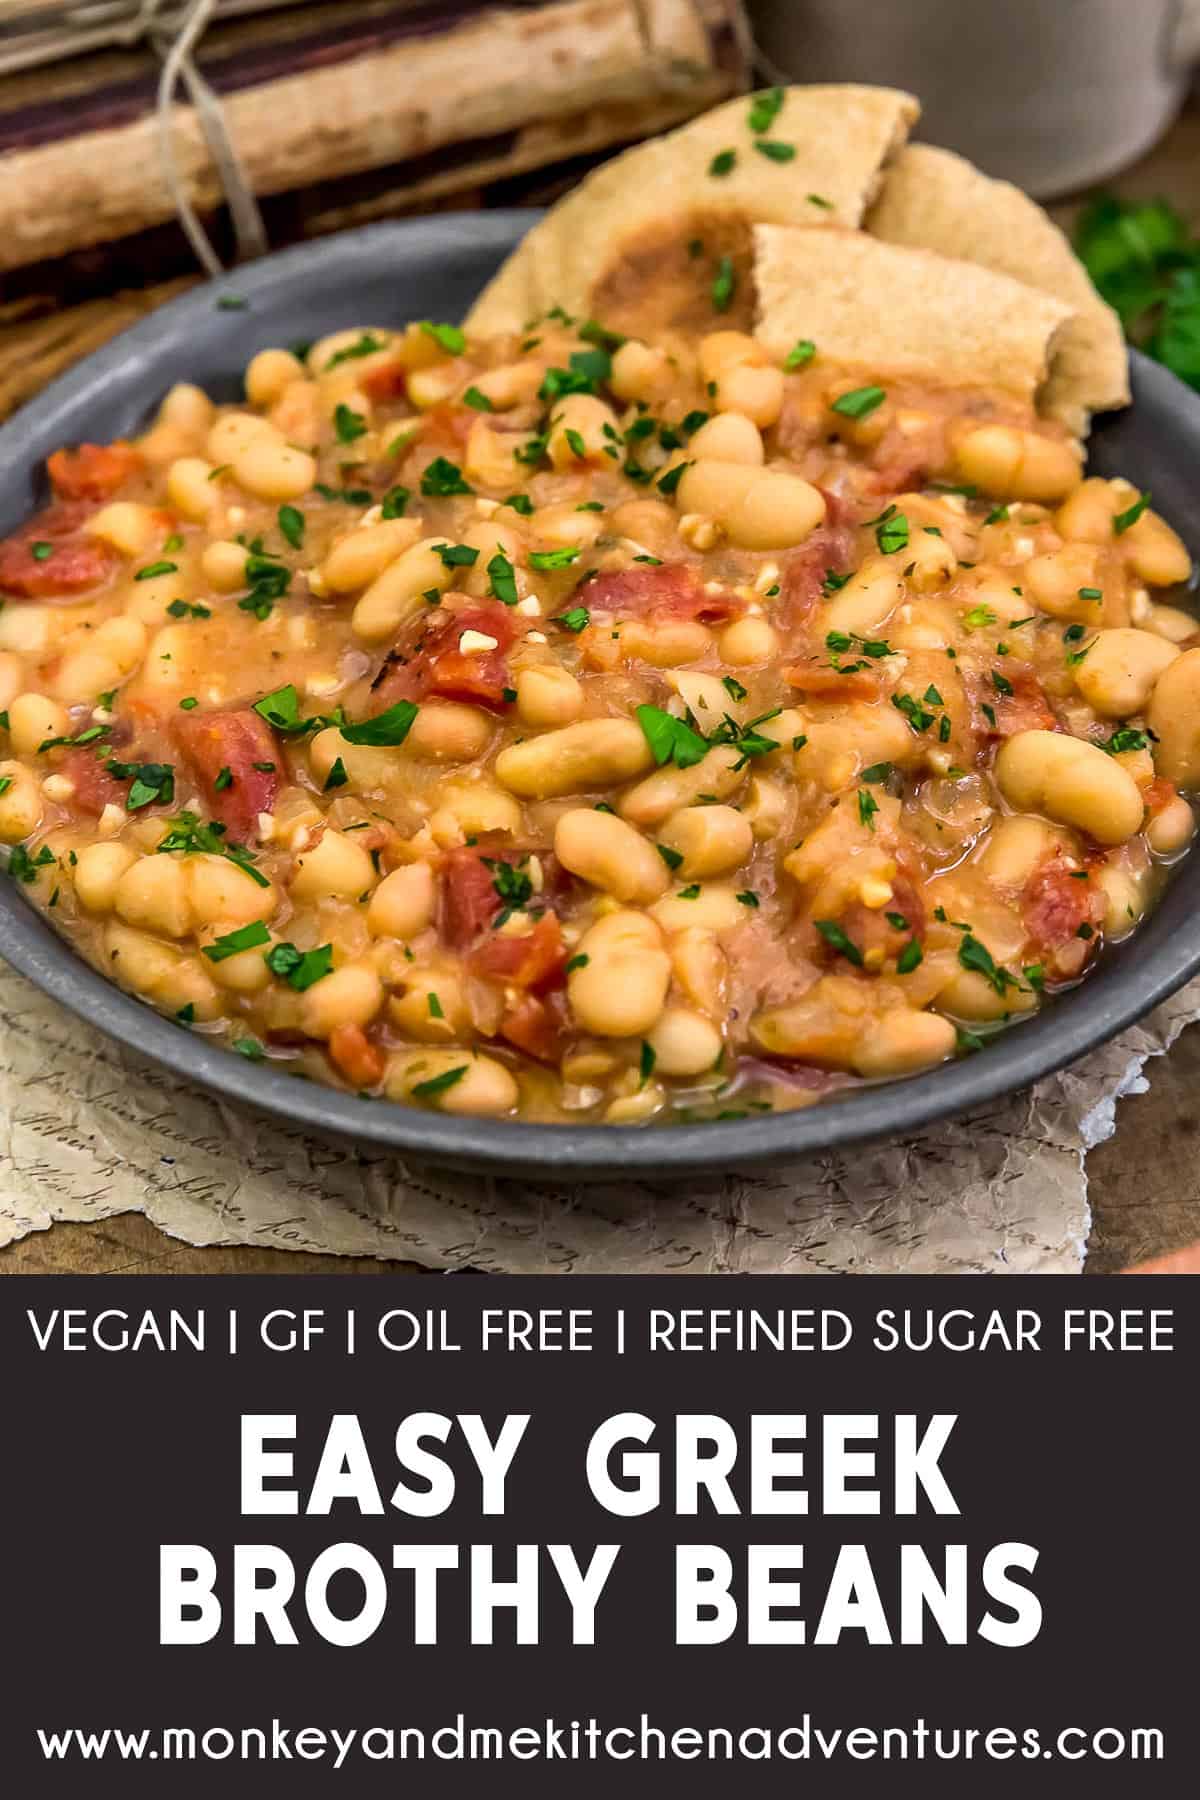 Easy Greek Brothy Beans with text description